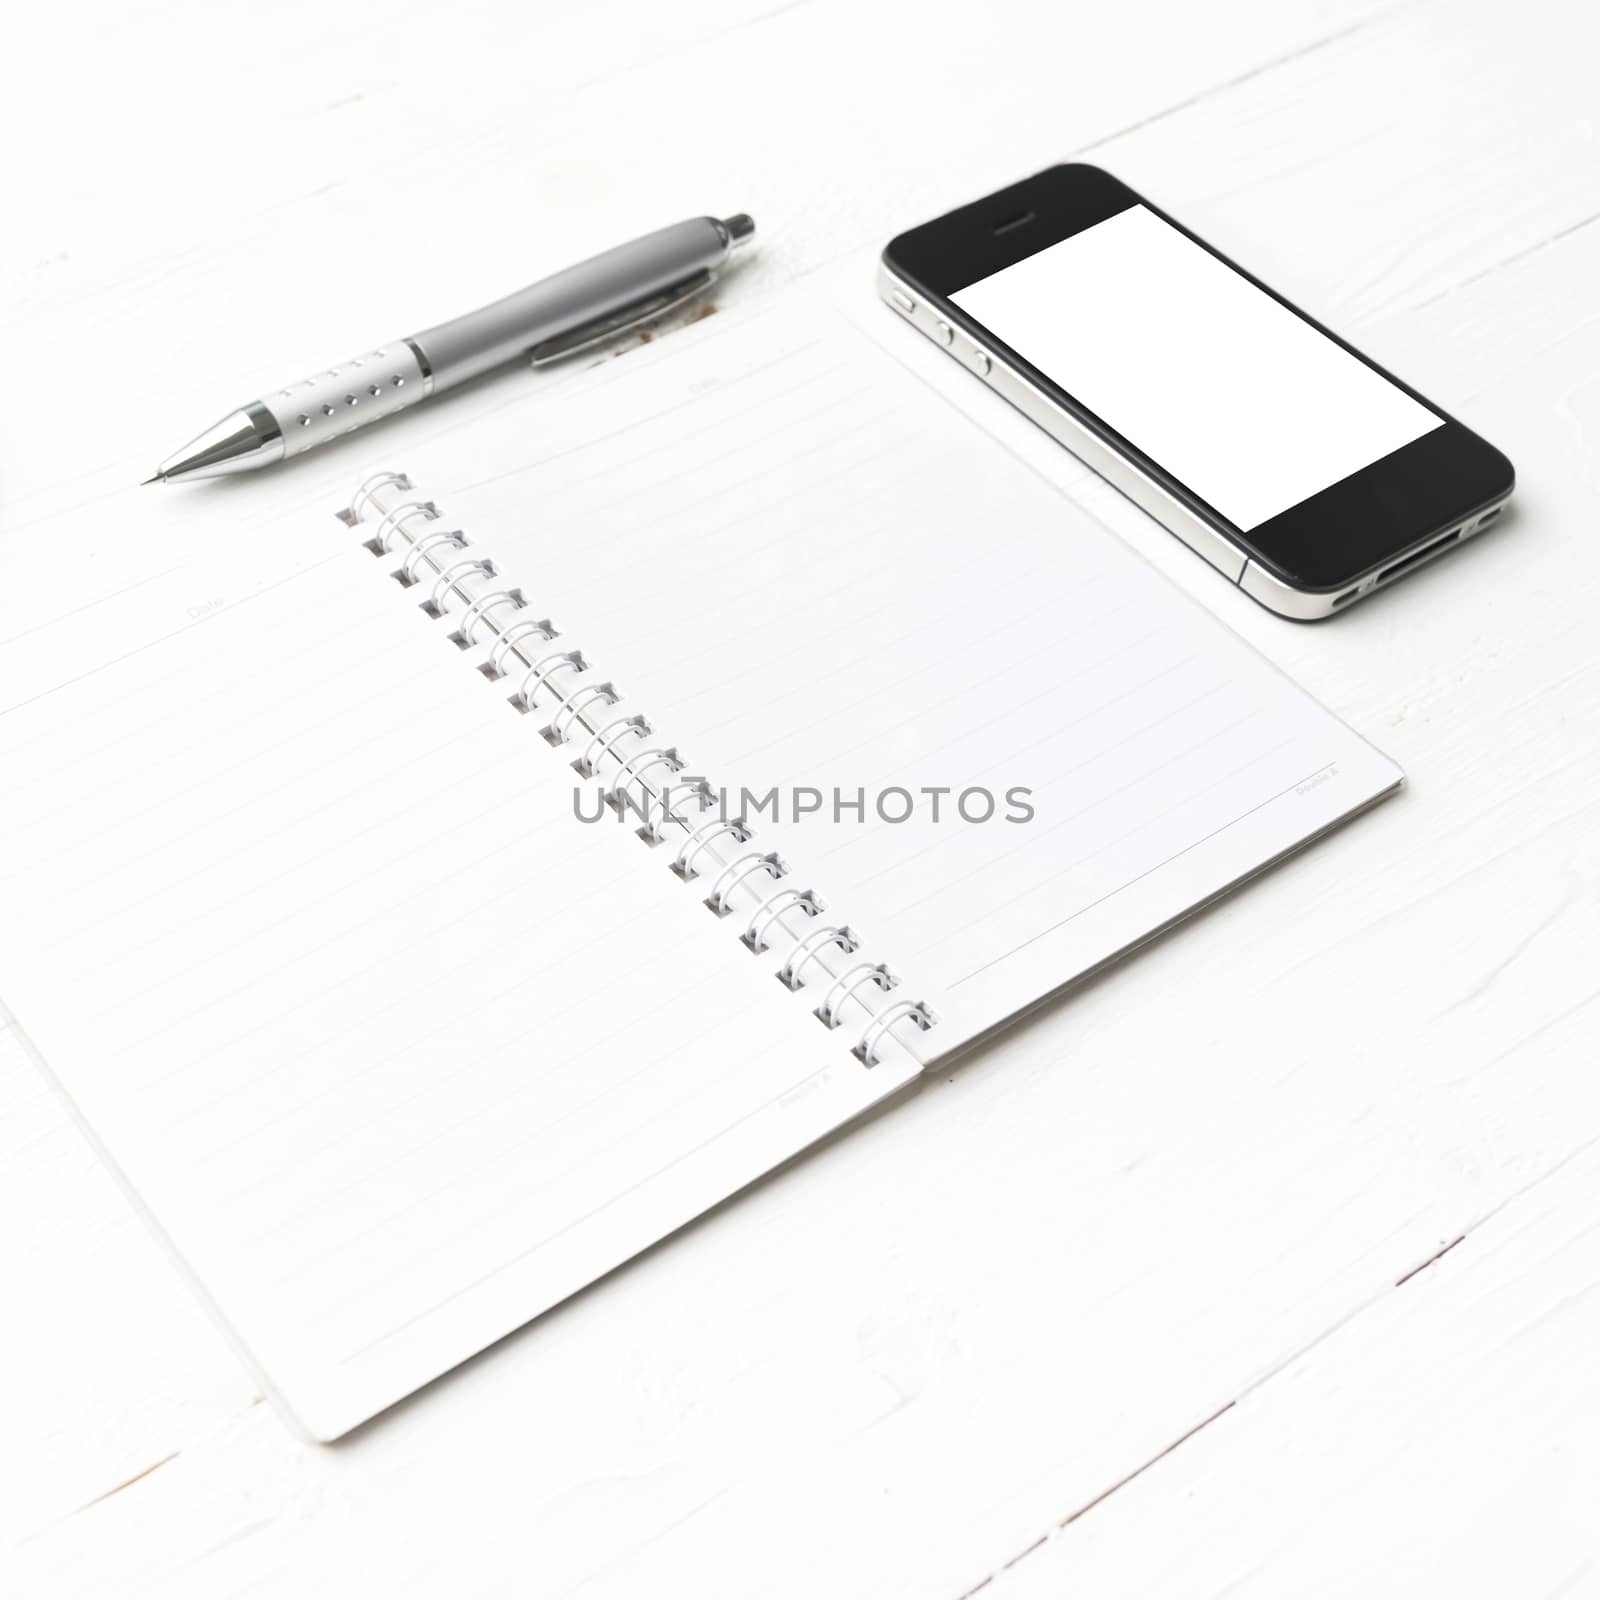 cellphone with notepad and pen over white table